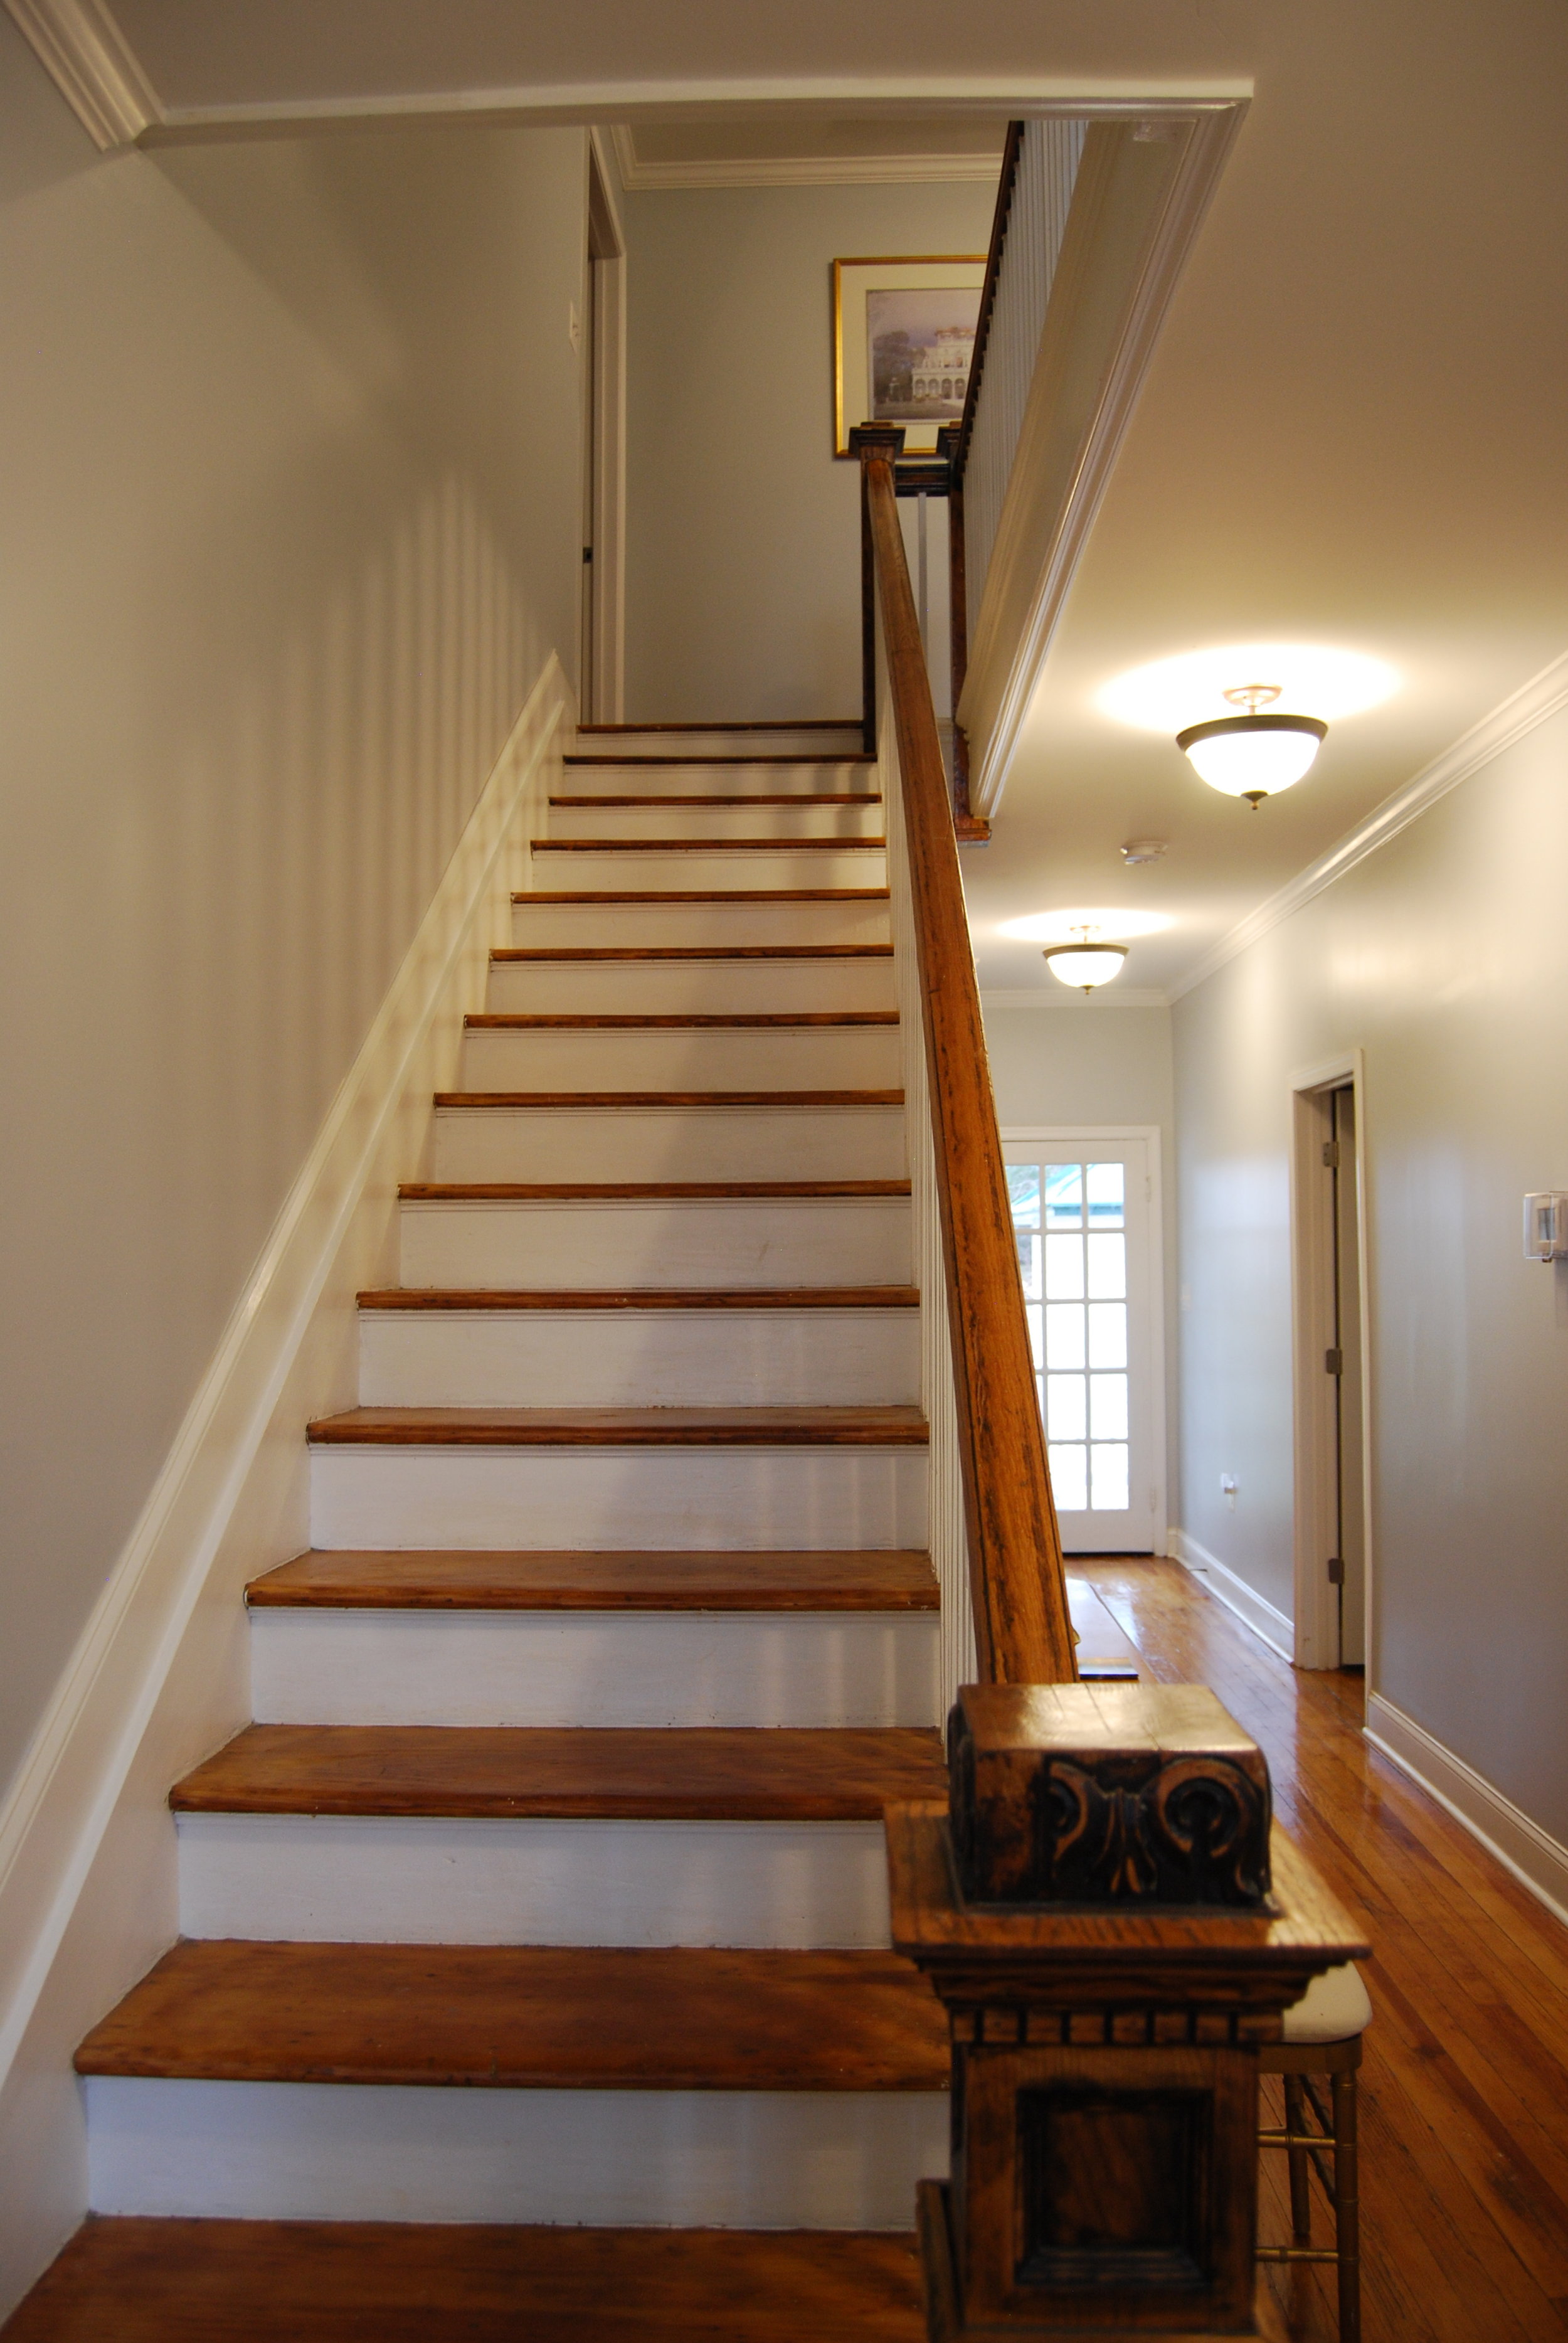 stairs and hallway to second floor.JPG